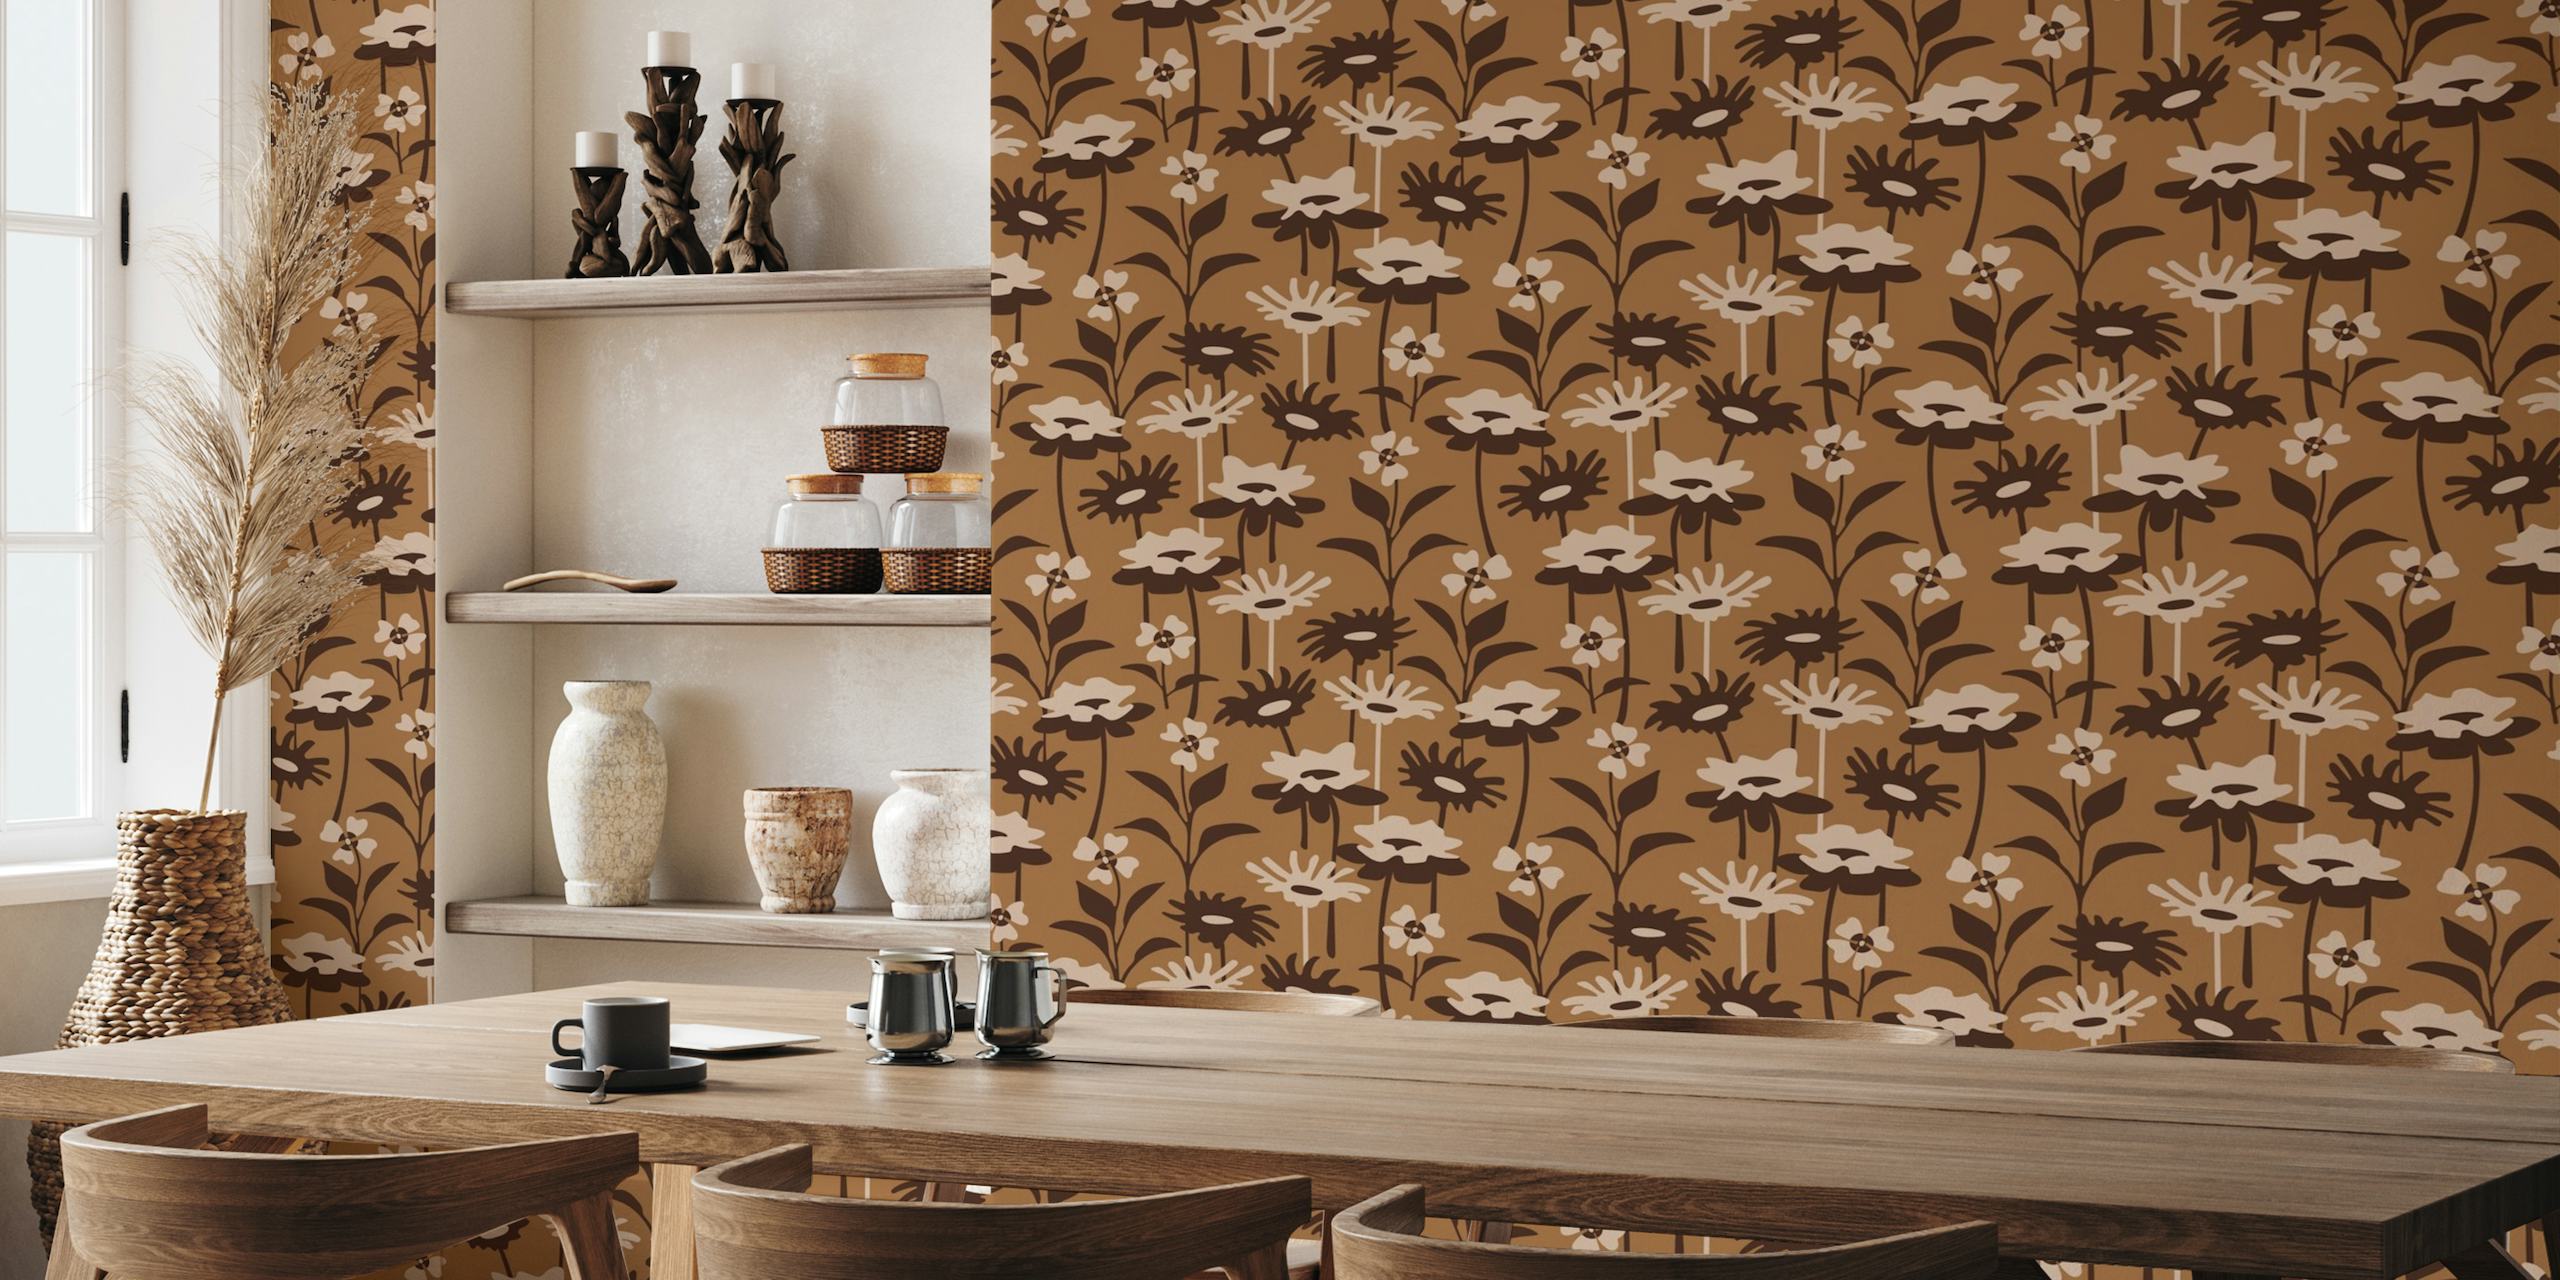 GARDEN MEADOW Retro Floral - Brown Earth Tone tapety